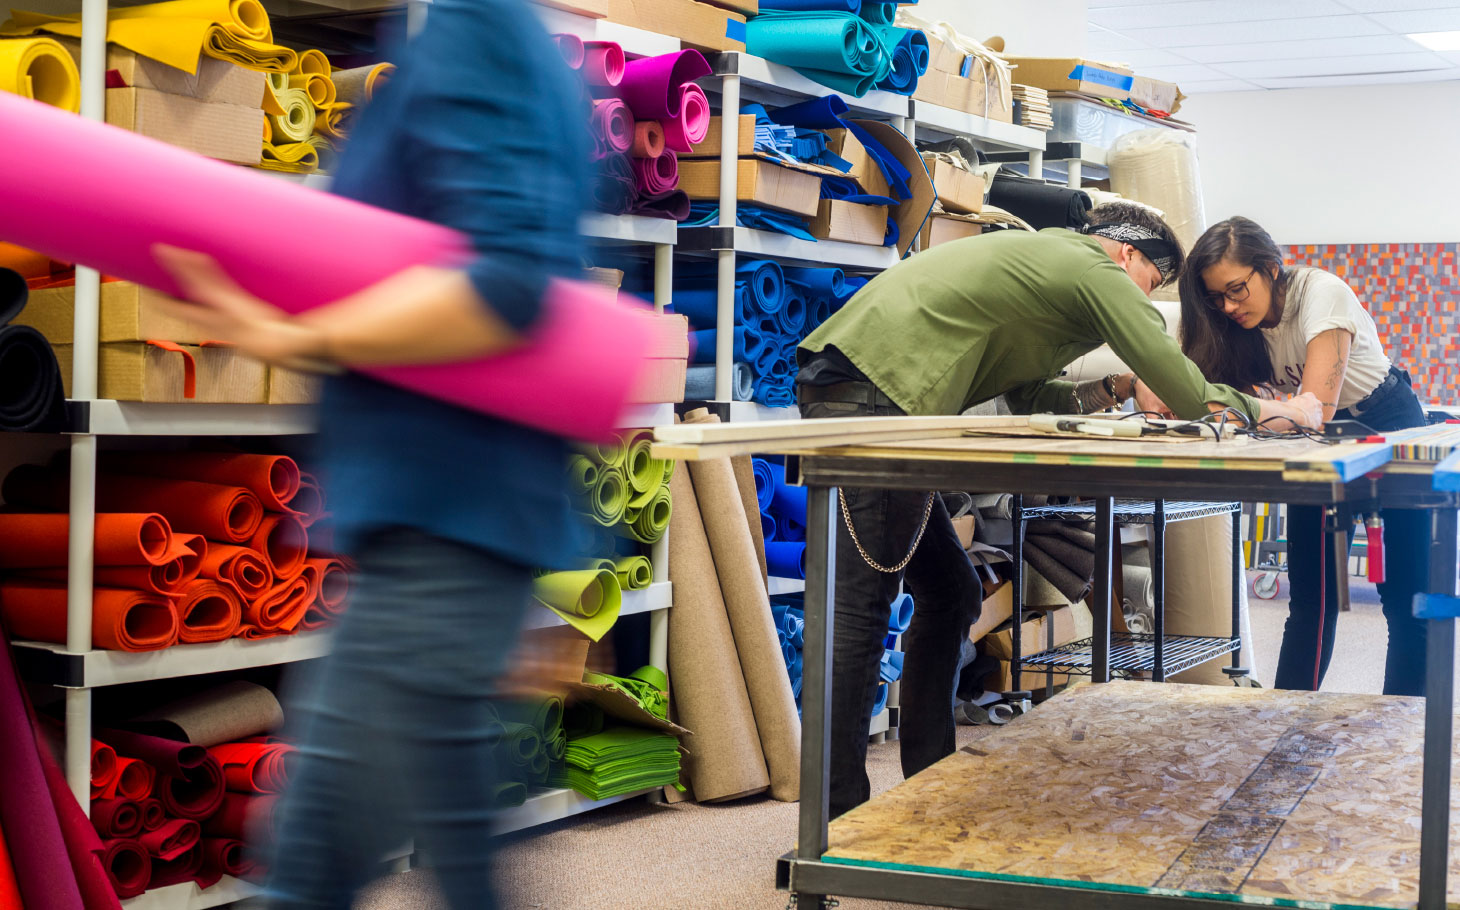 Three people working in a space with work tables and shelves of felt.